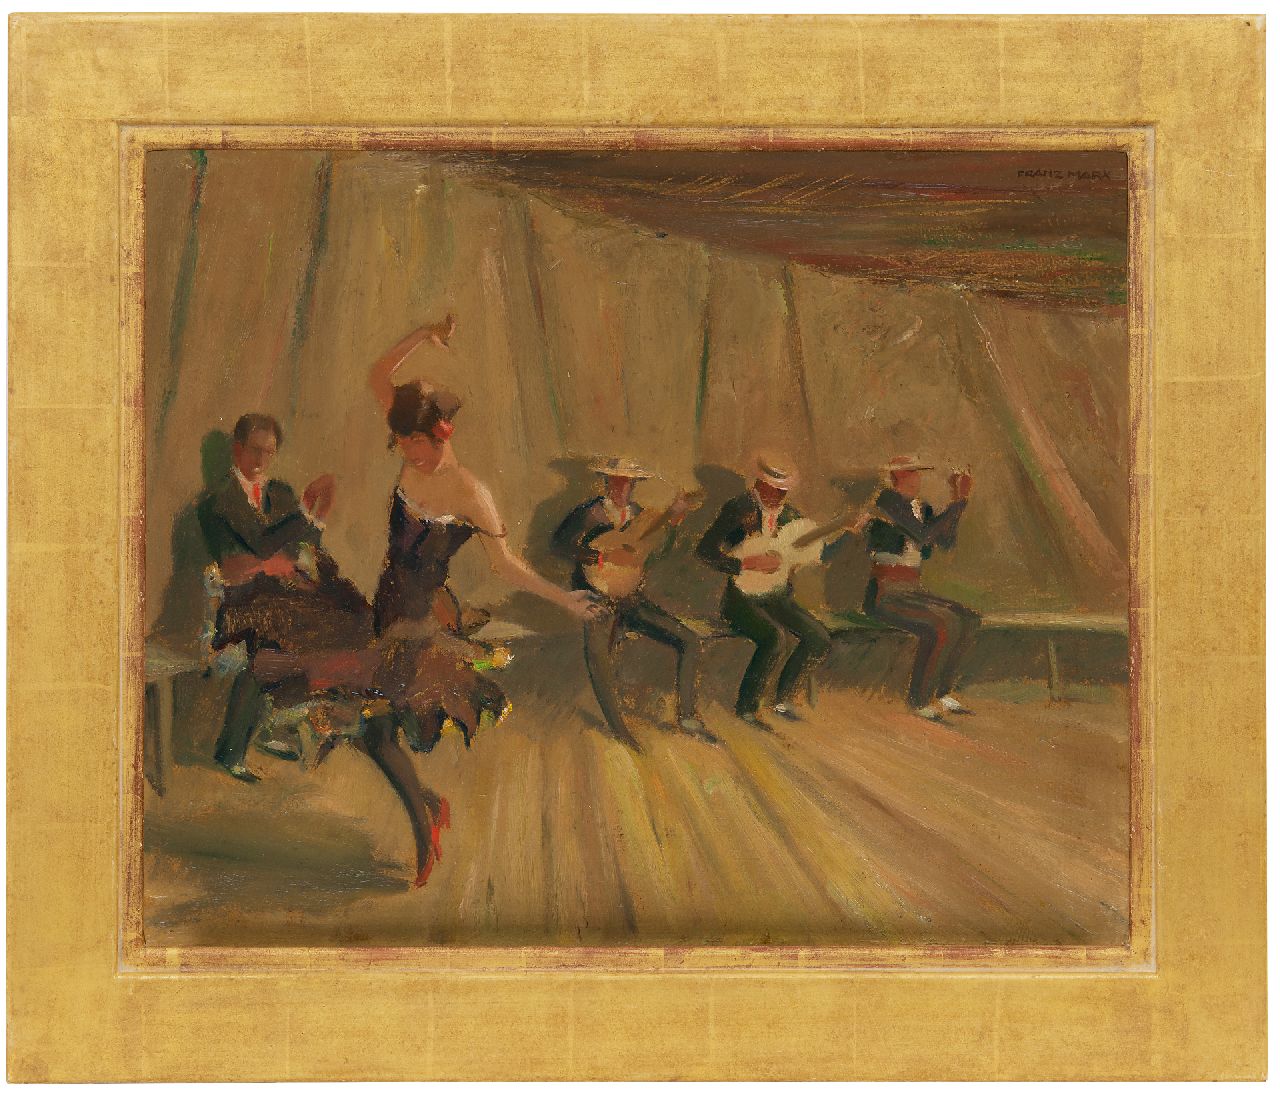 Marx F.  | Franz Marx | Paintings offered for sale | Flamenco dancer and musicians, oil on board 44.5 x 54.8 cm, signed u.r.